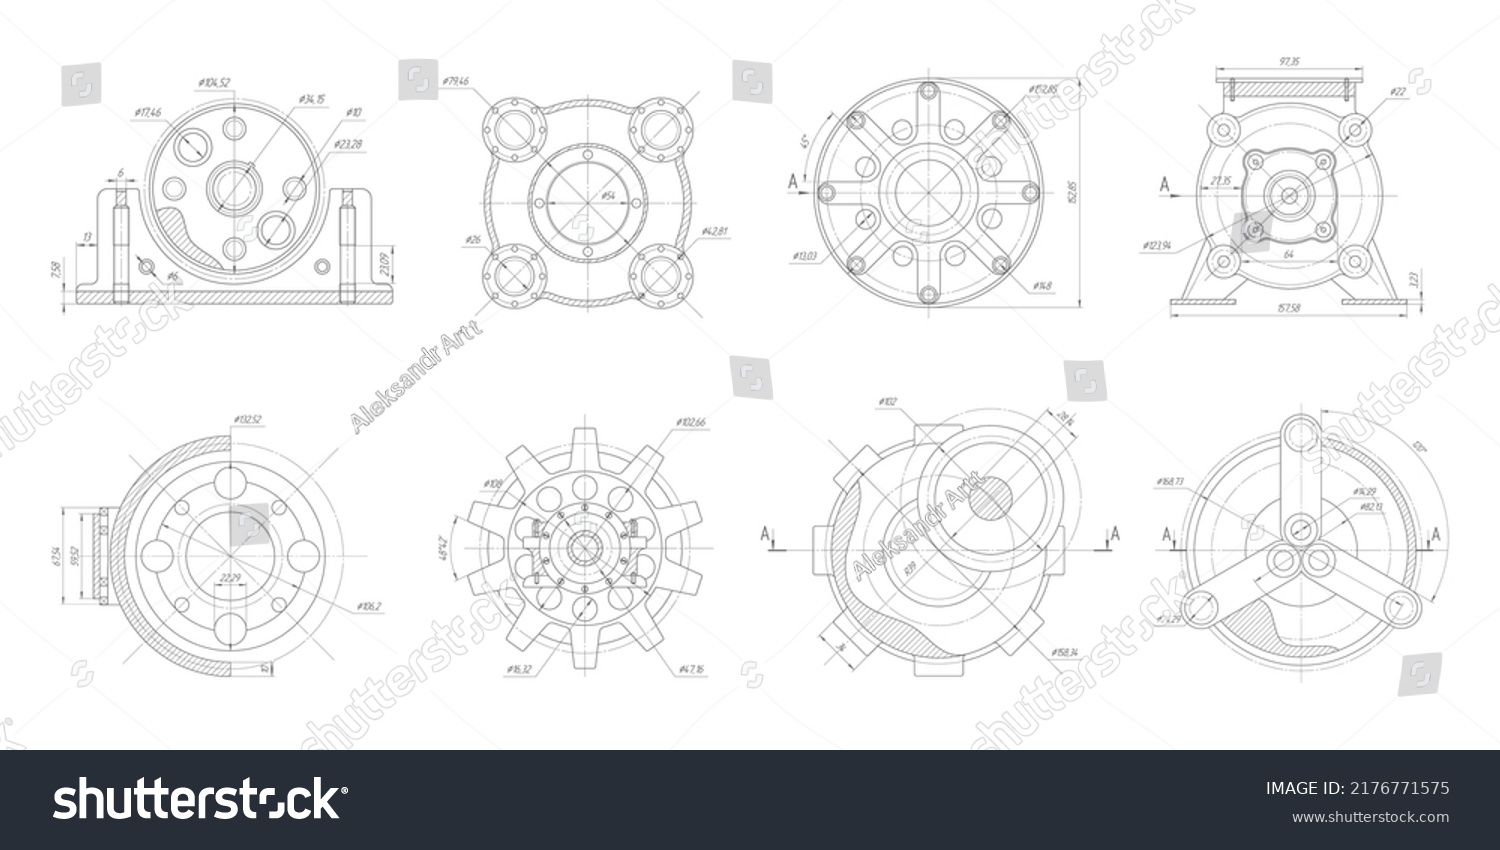 Technical drawing .Mechanical Engineering background .Technology banner.Vector illustration . #2176771575